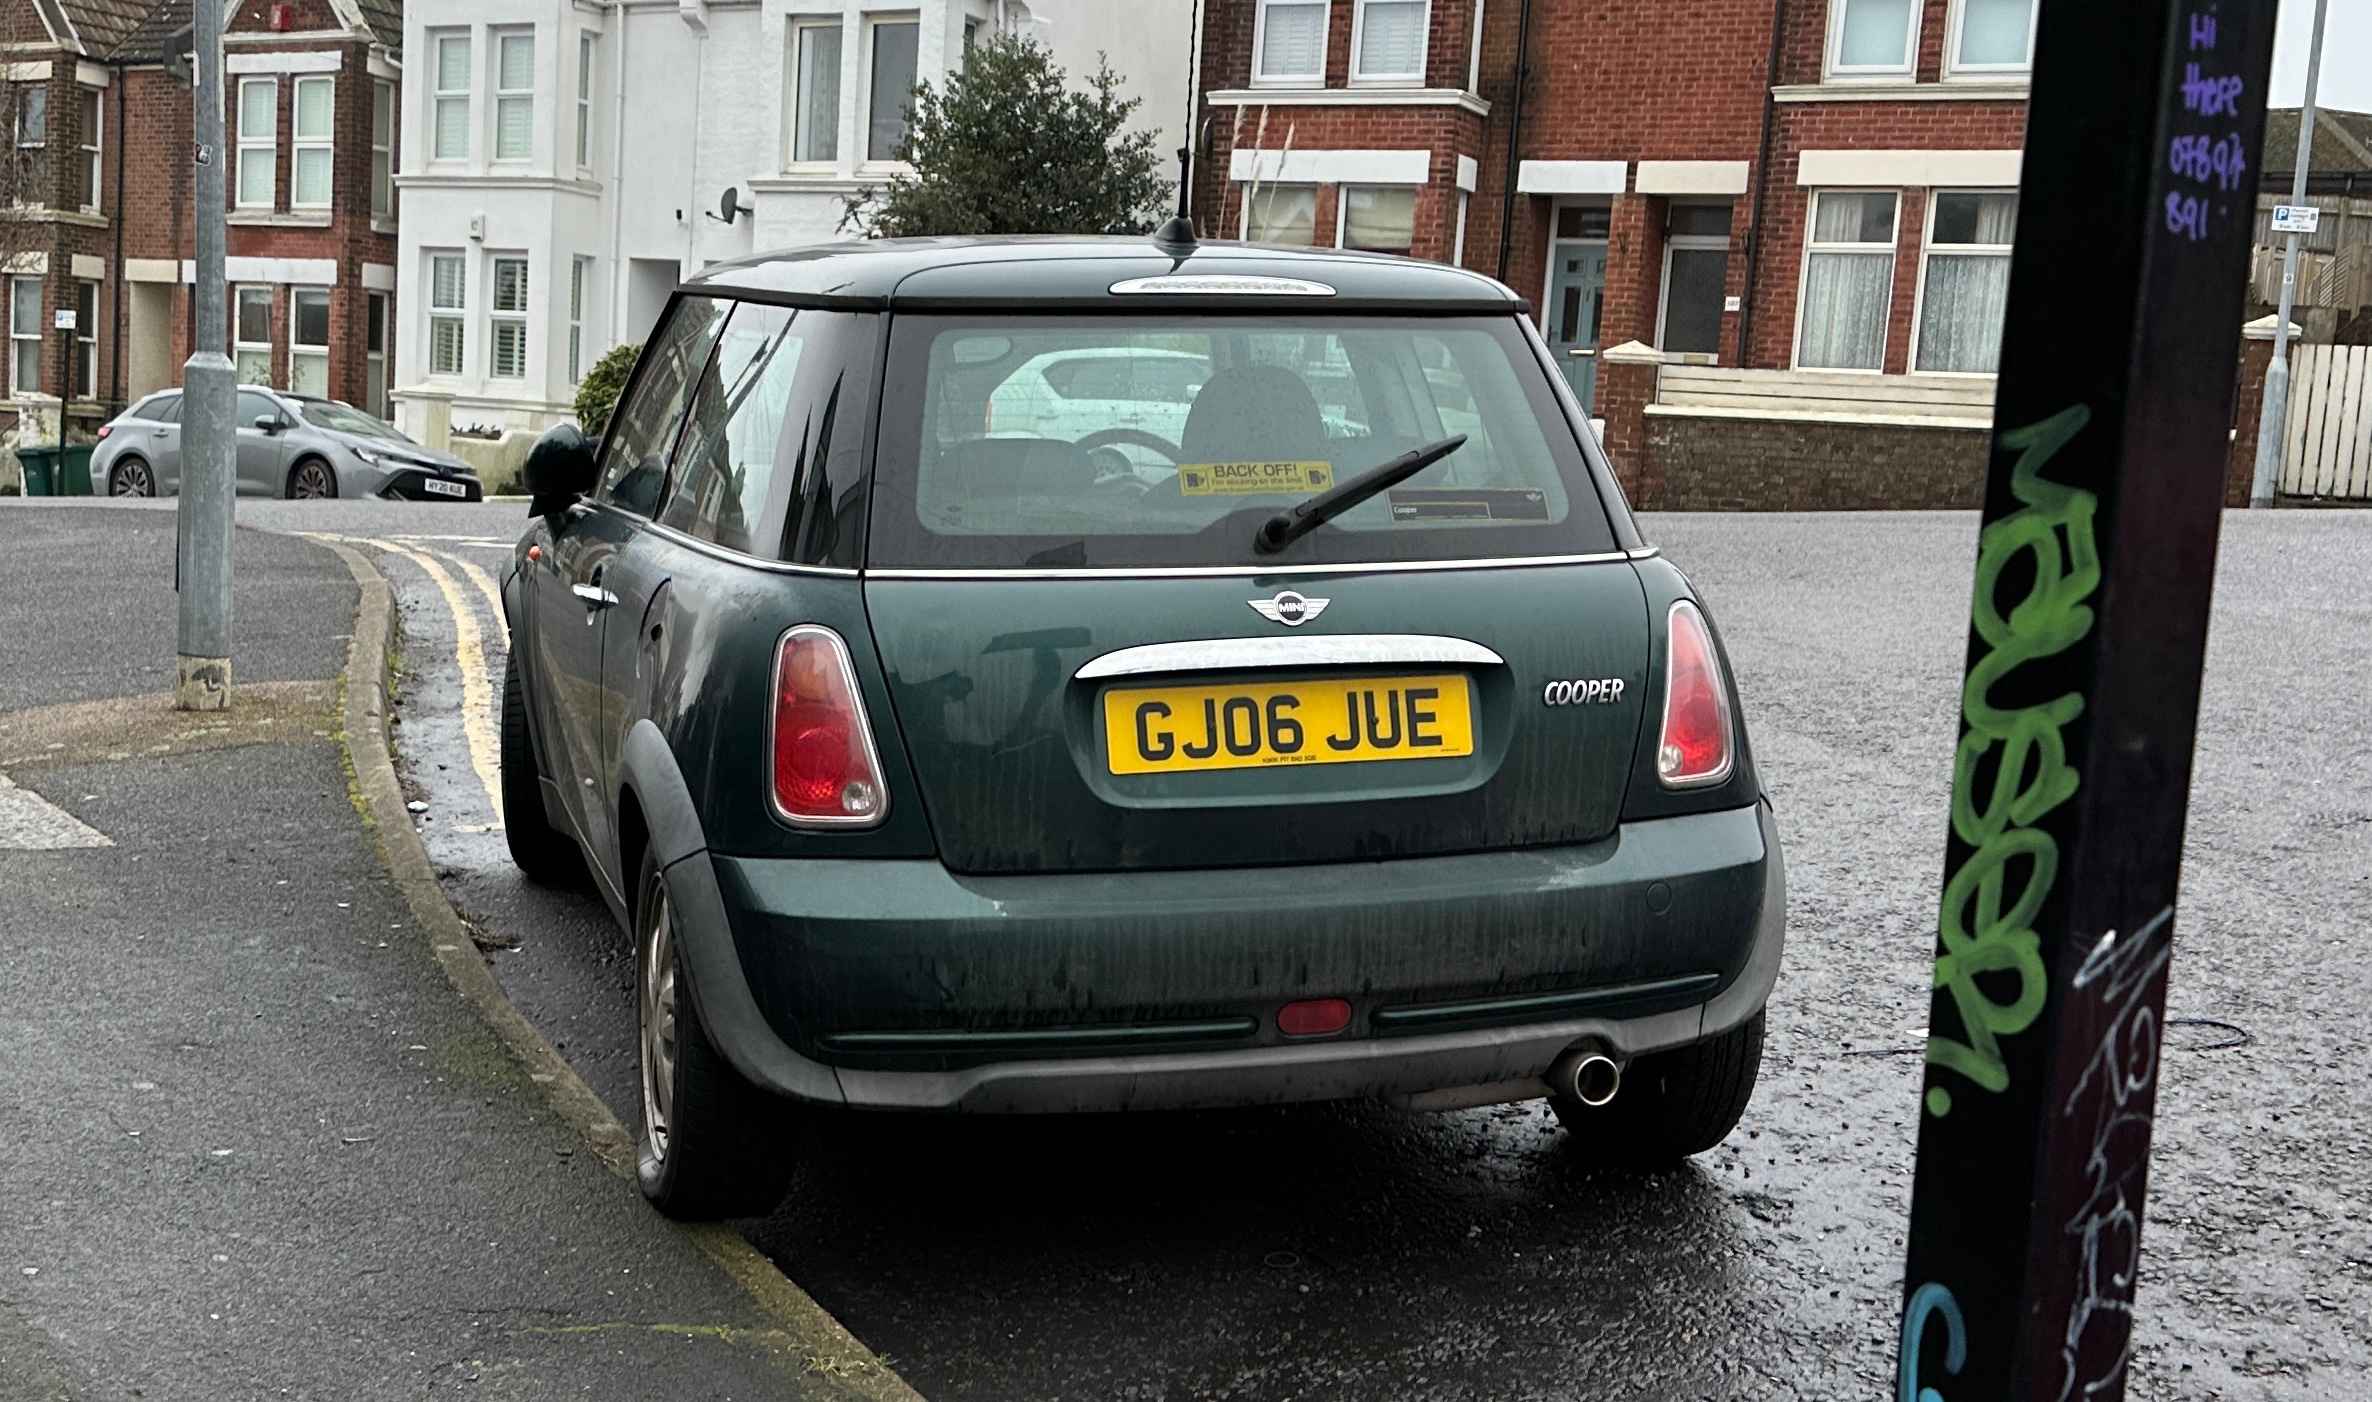 Photograph of GL06 JUE - a Green Mini Cooper parked in Hollingdean by a non-resident. The seventh of seven photographs supplied by the residents of Hollingdean.